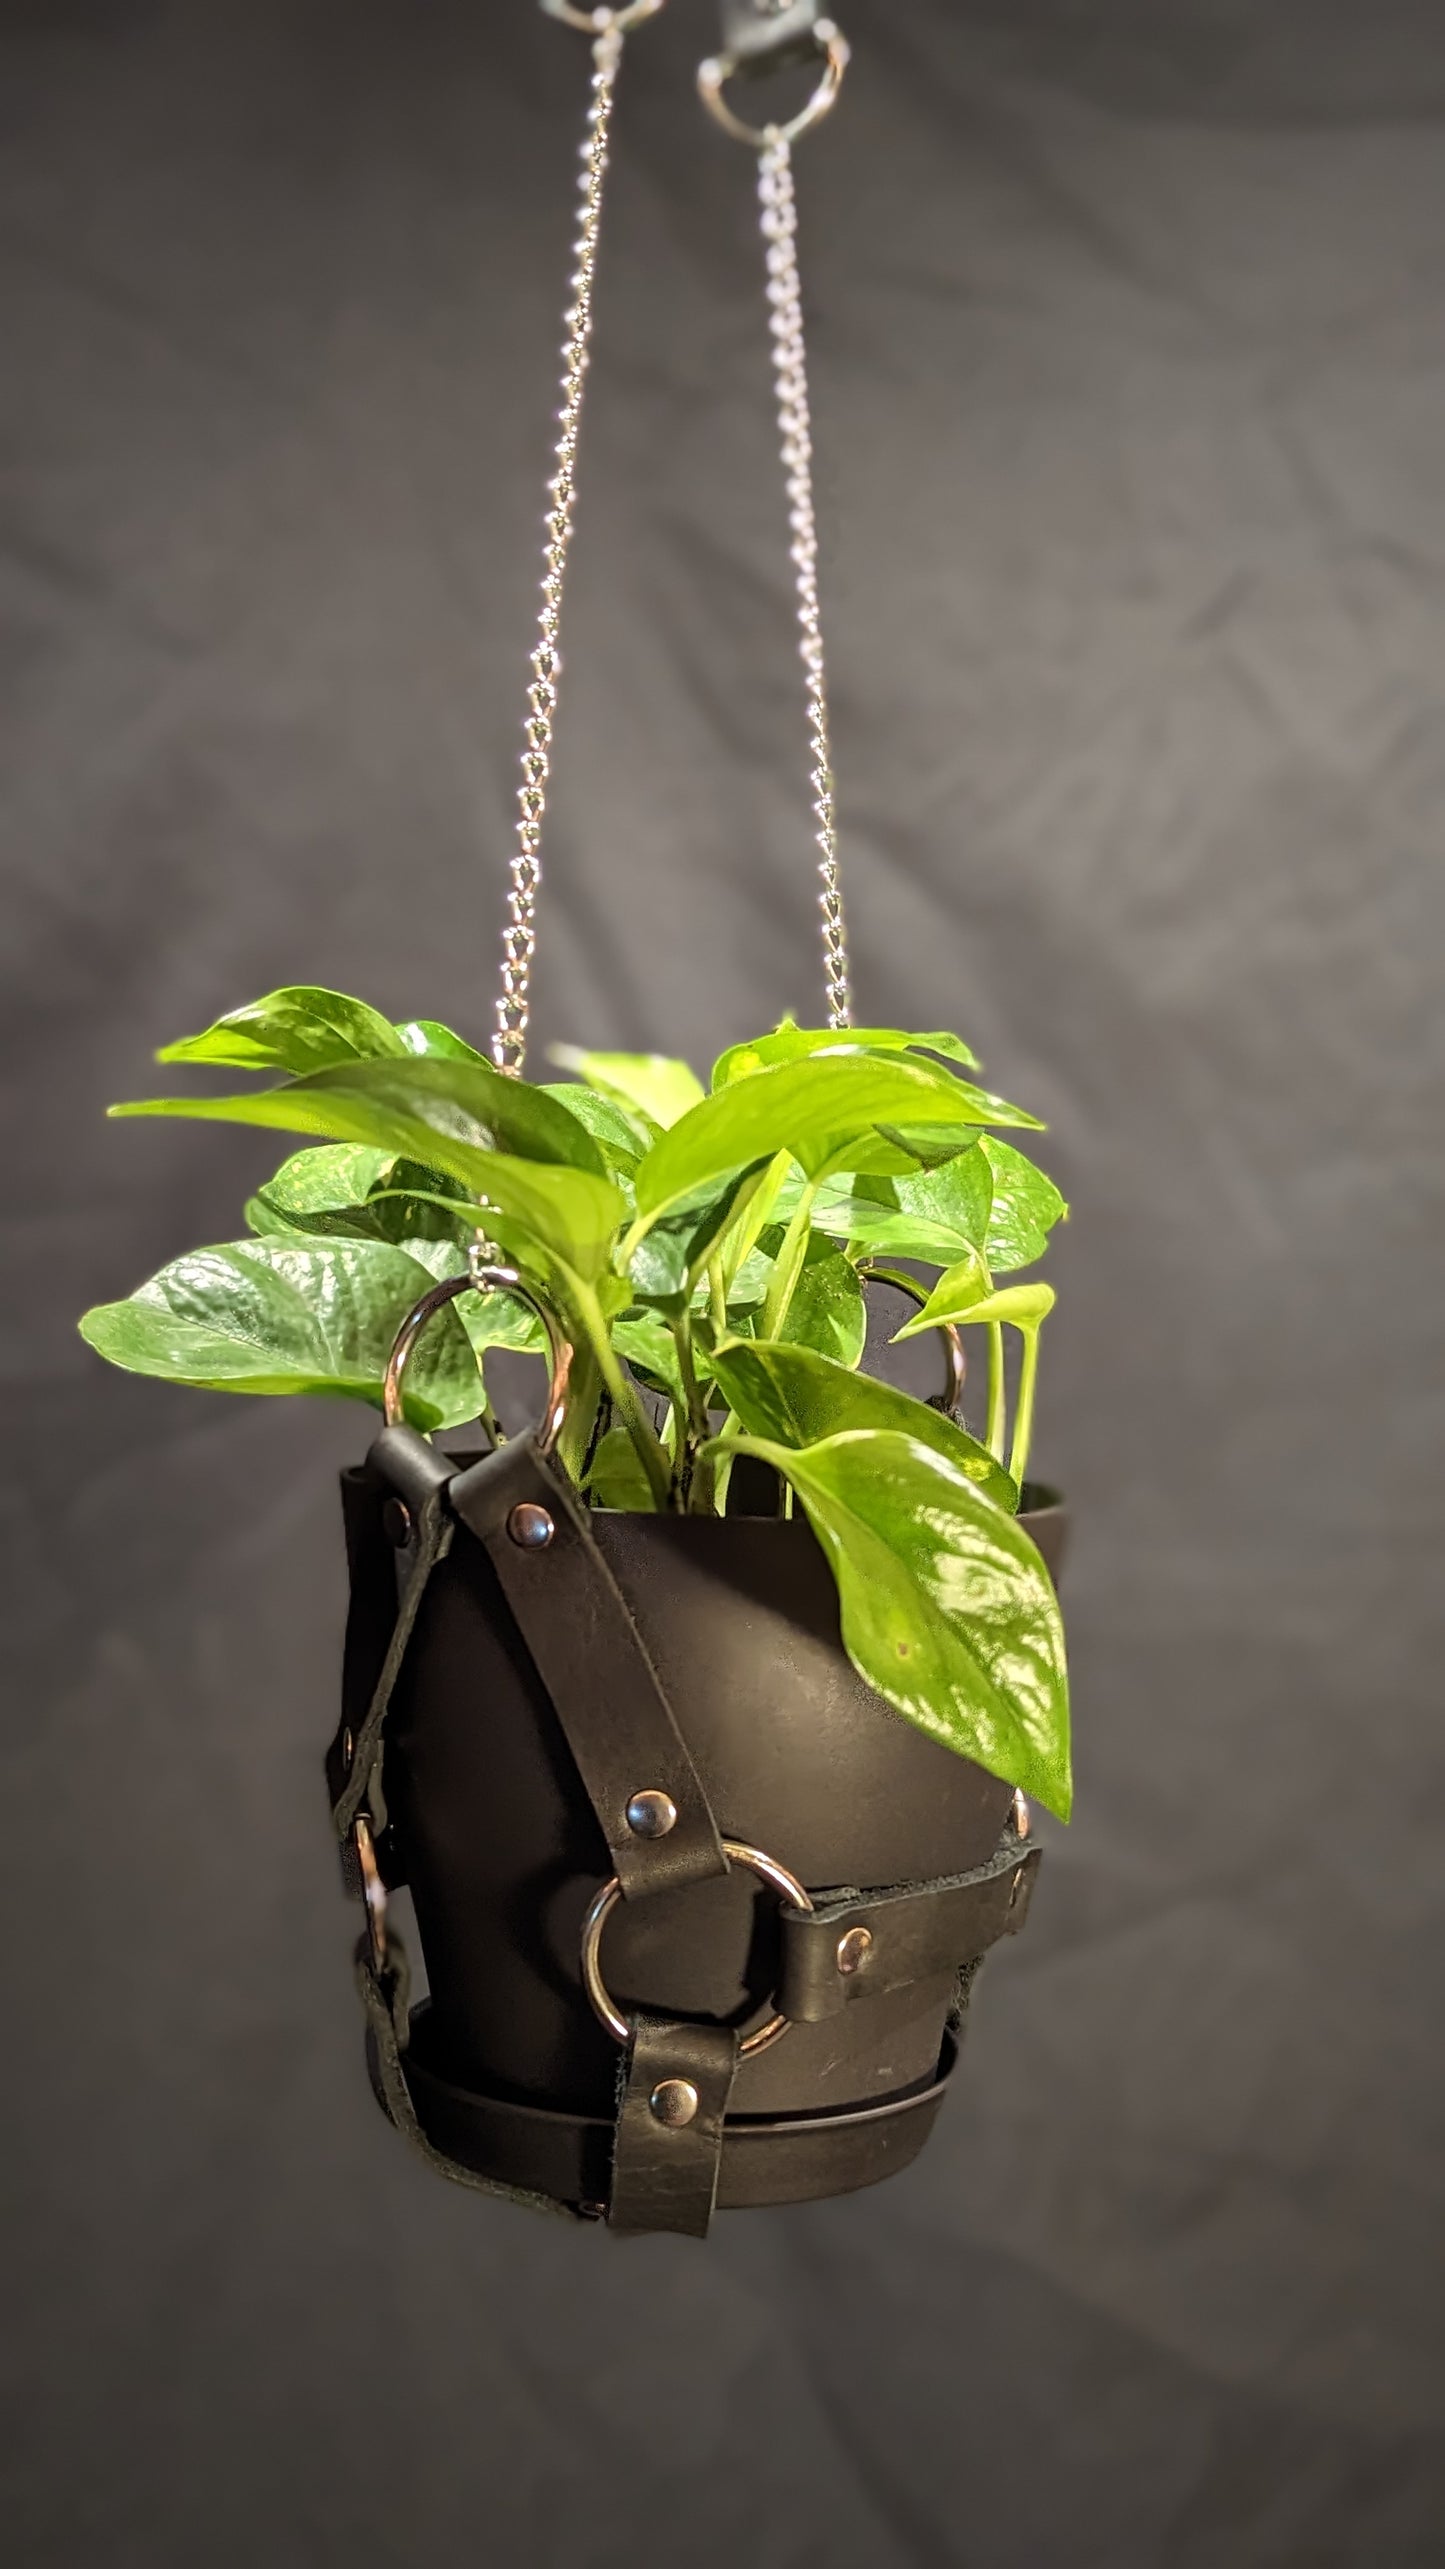 Black leather plant hanger with silver hardware and chain. It is holding a 6" black plant pot with a golden pothos plant.